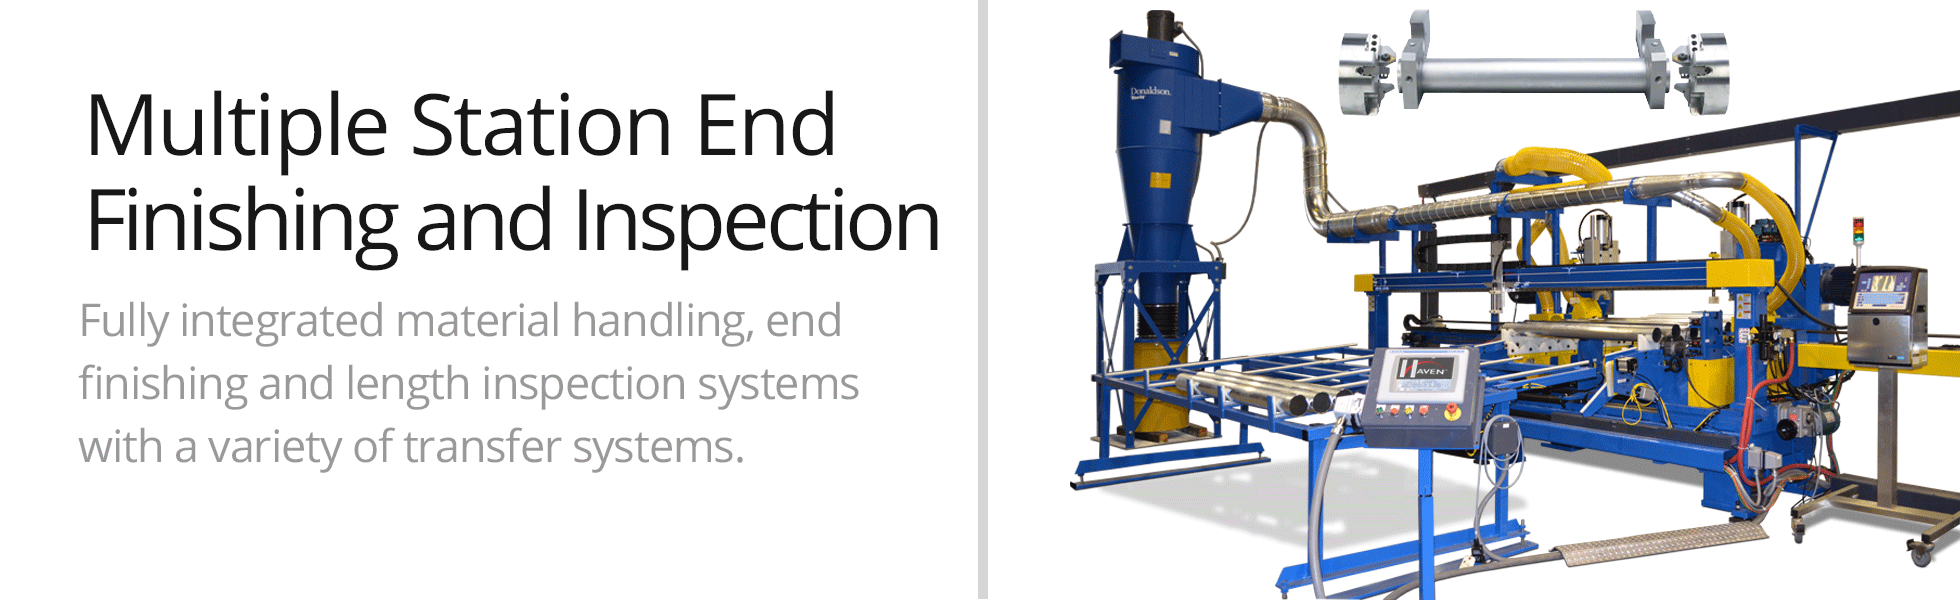 Multiple Station Endfinishing and Inspection Machine Video